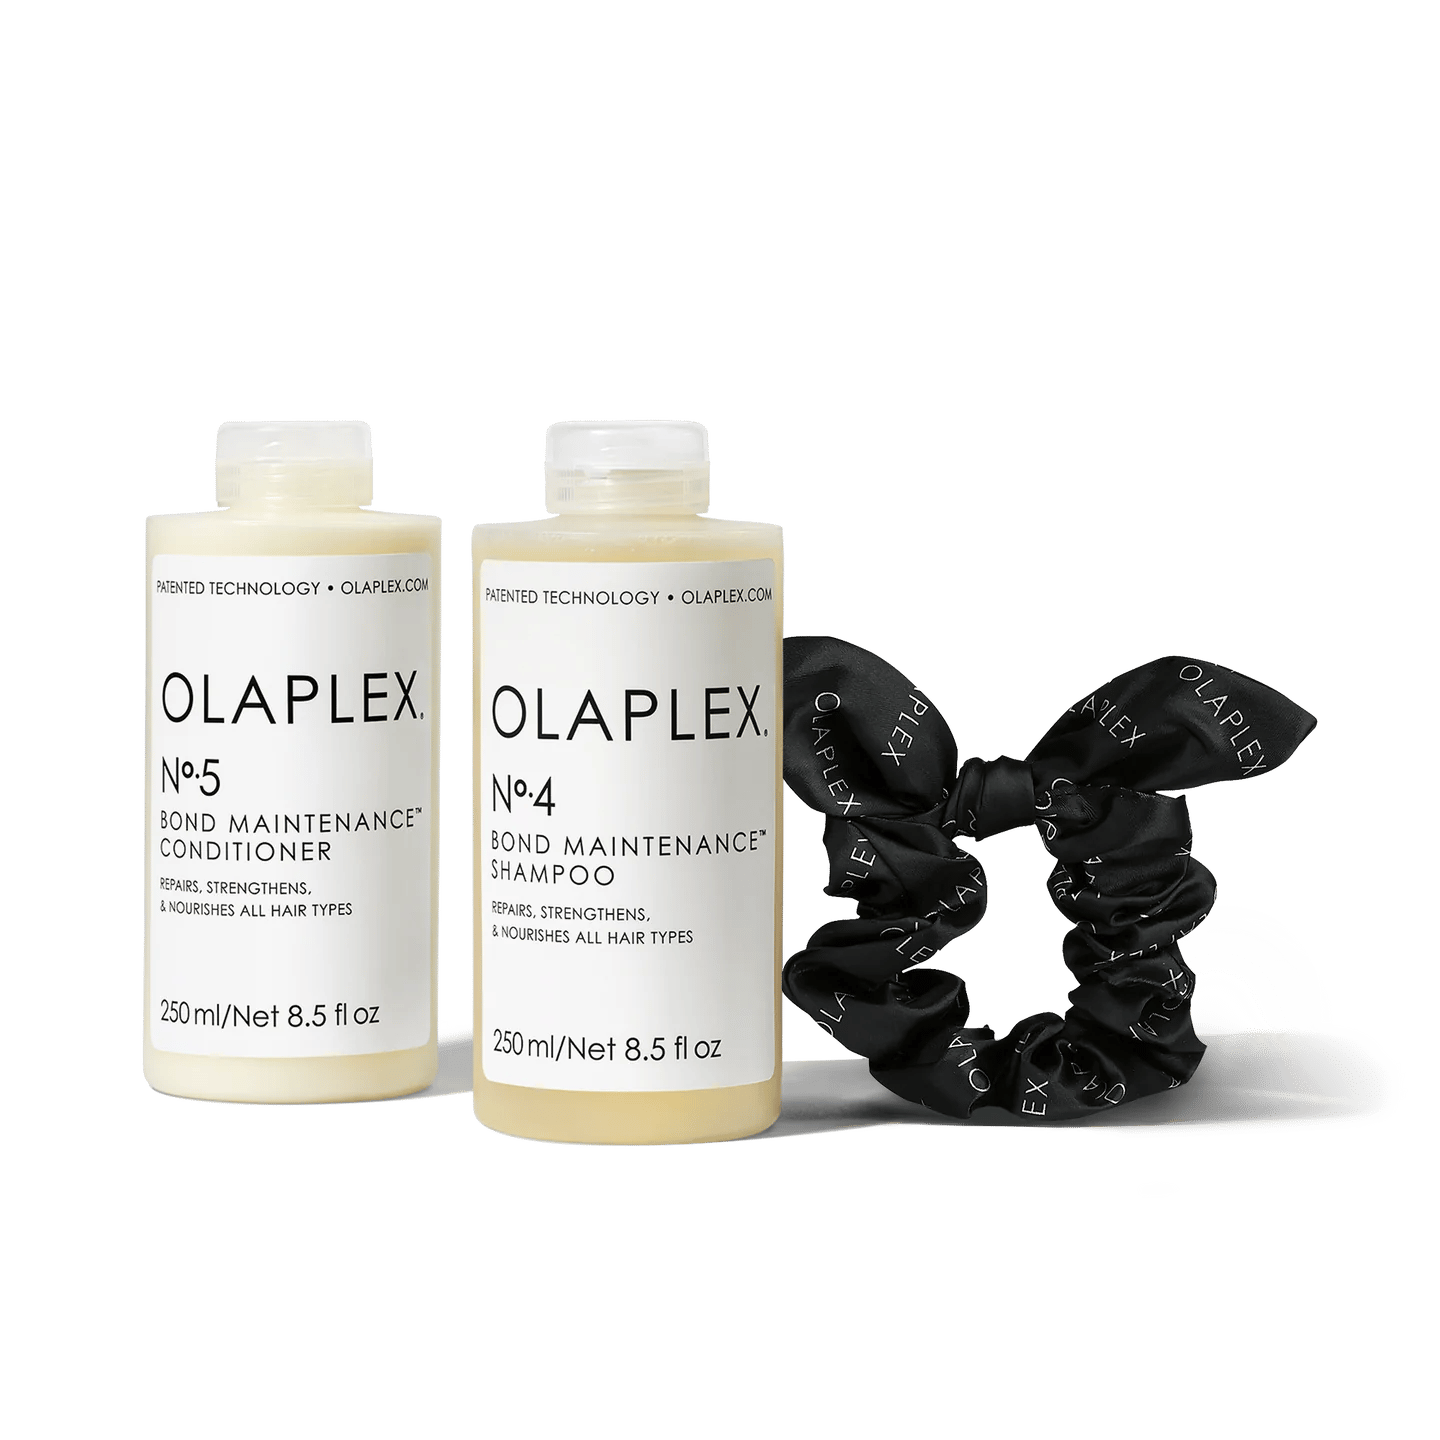 DAILY CLEANSE & CONDITION DUO